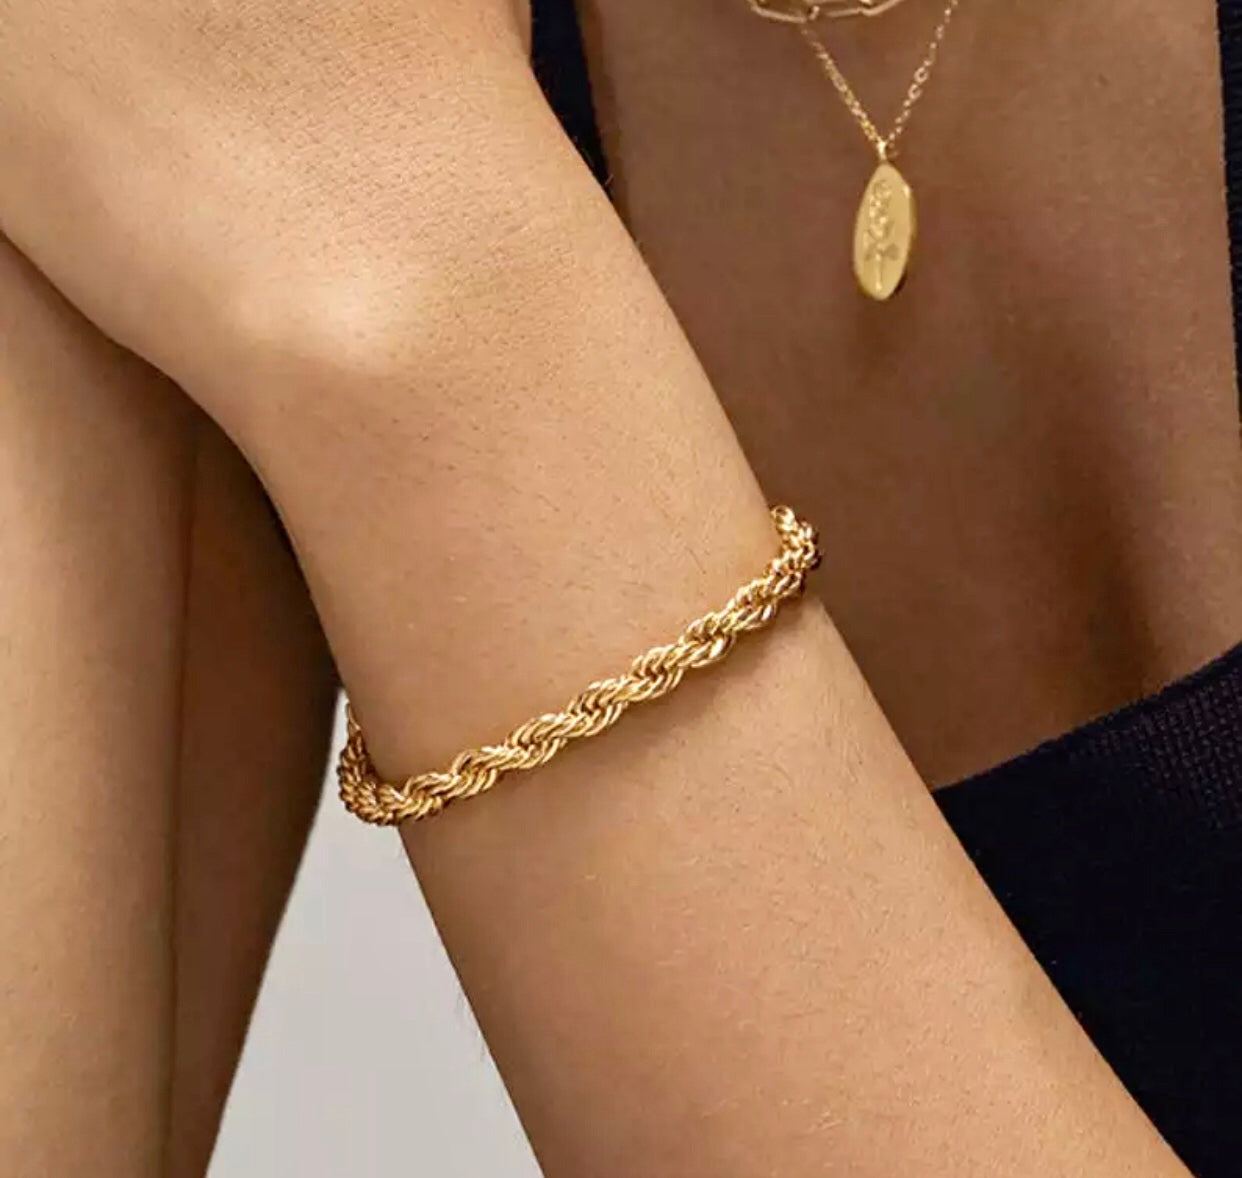 Gold-rope-anklet-chain-anklet-rope-ankle-bracelet-1-oak-jewelry